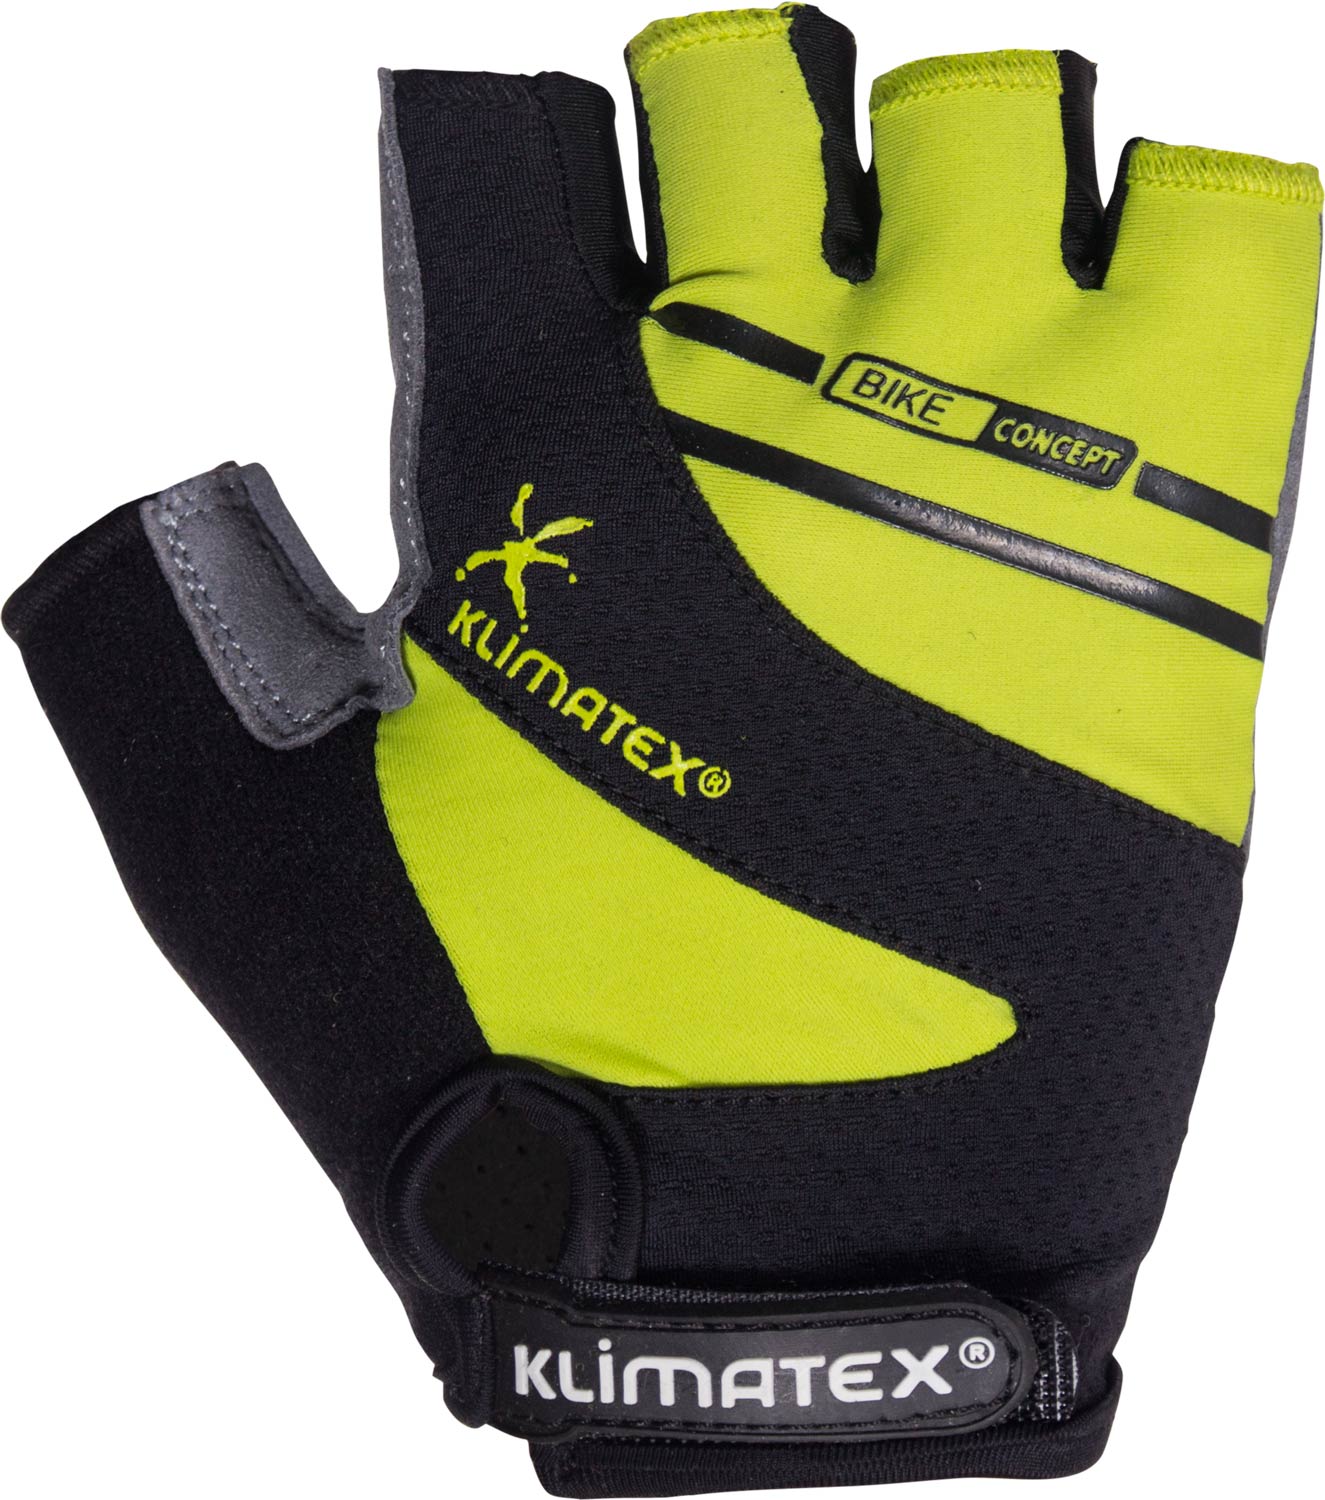 Unisex cycling gloves